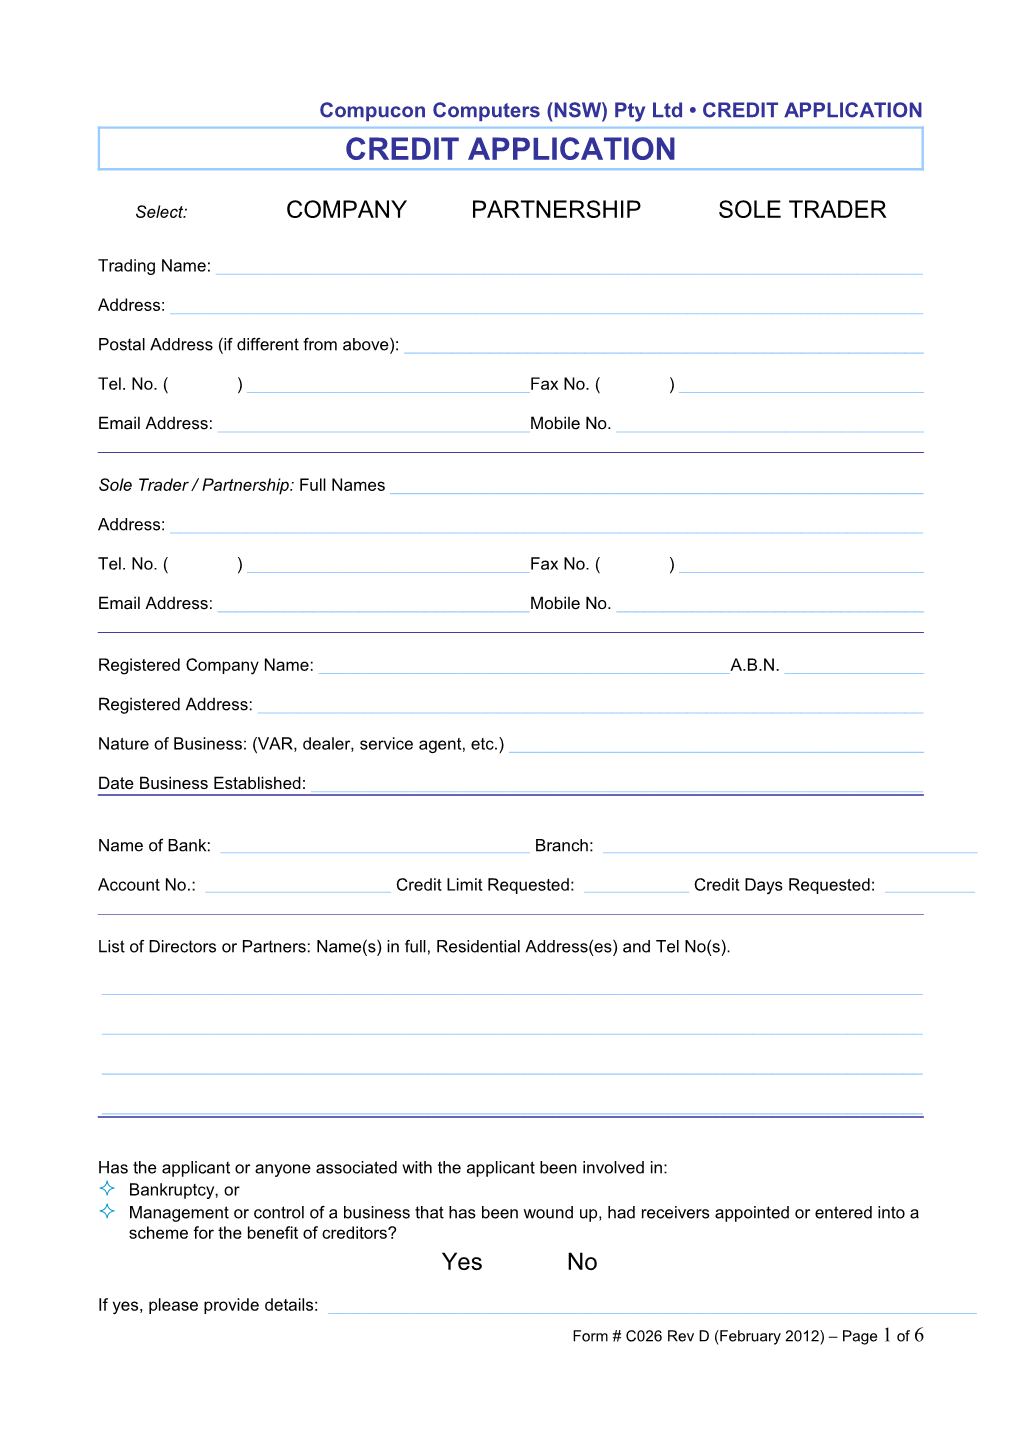 Compucon Computers (NSW) Pty Ltd CREDIT APPLICATION